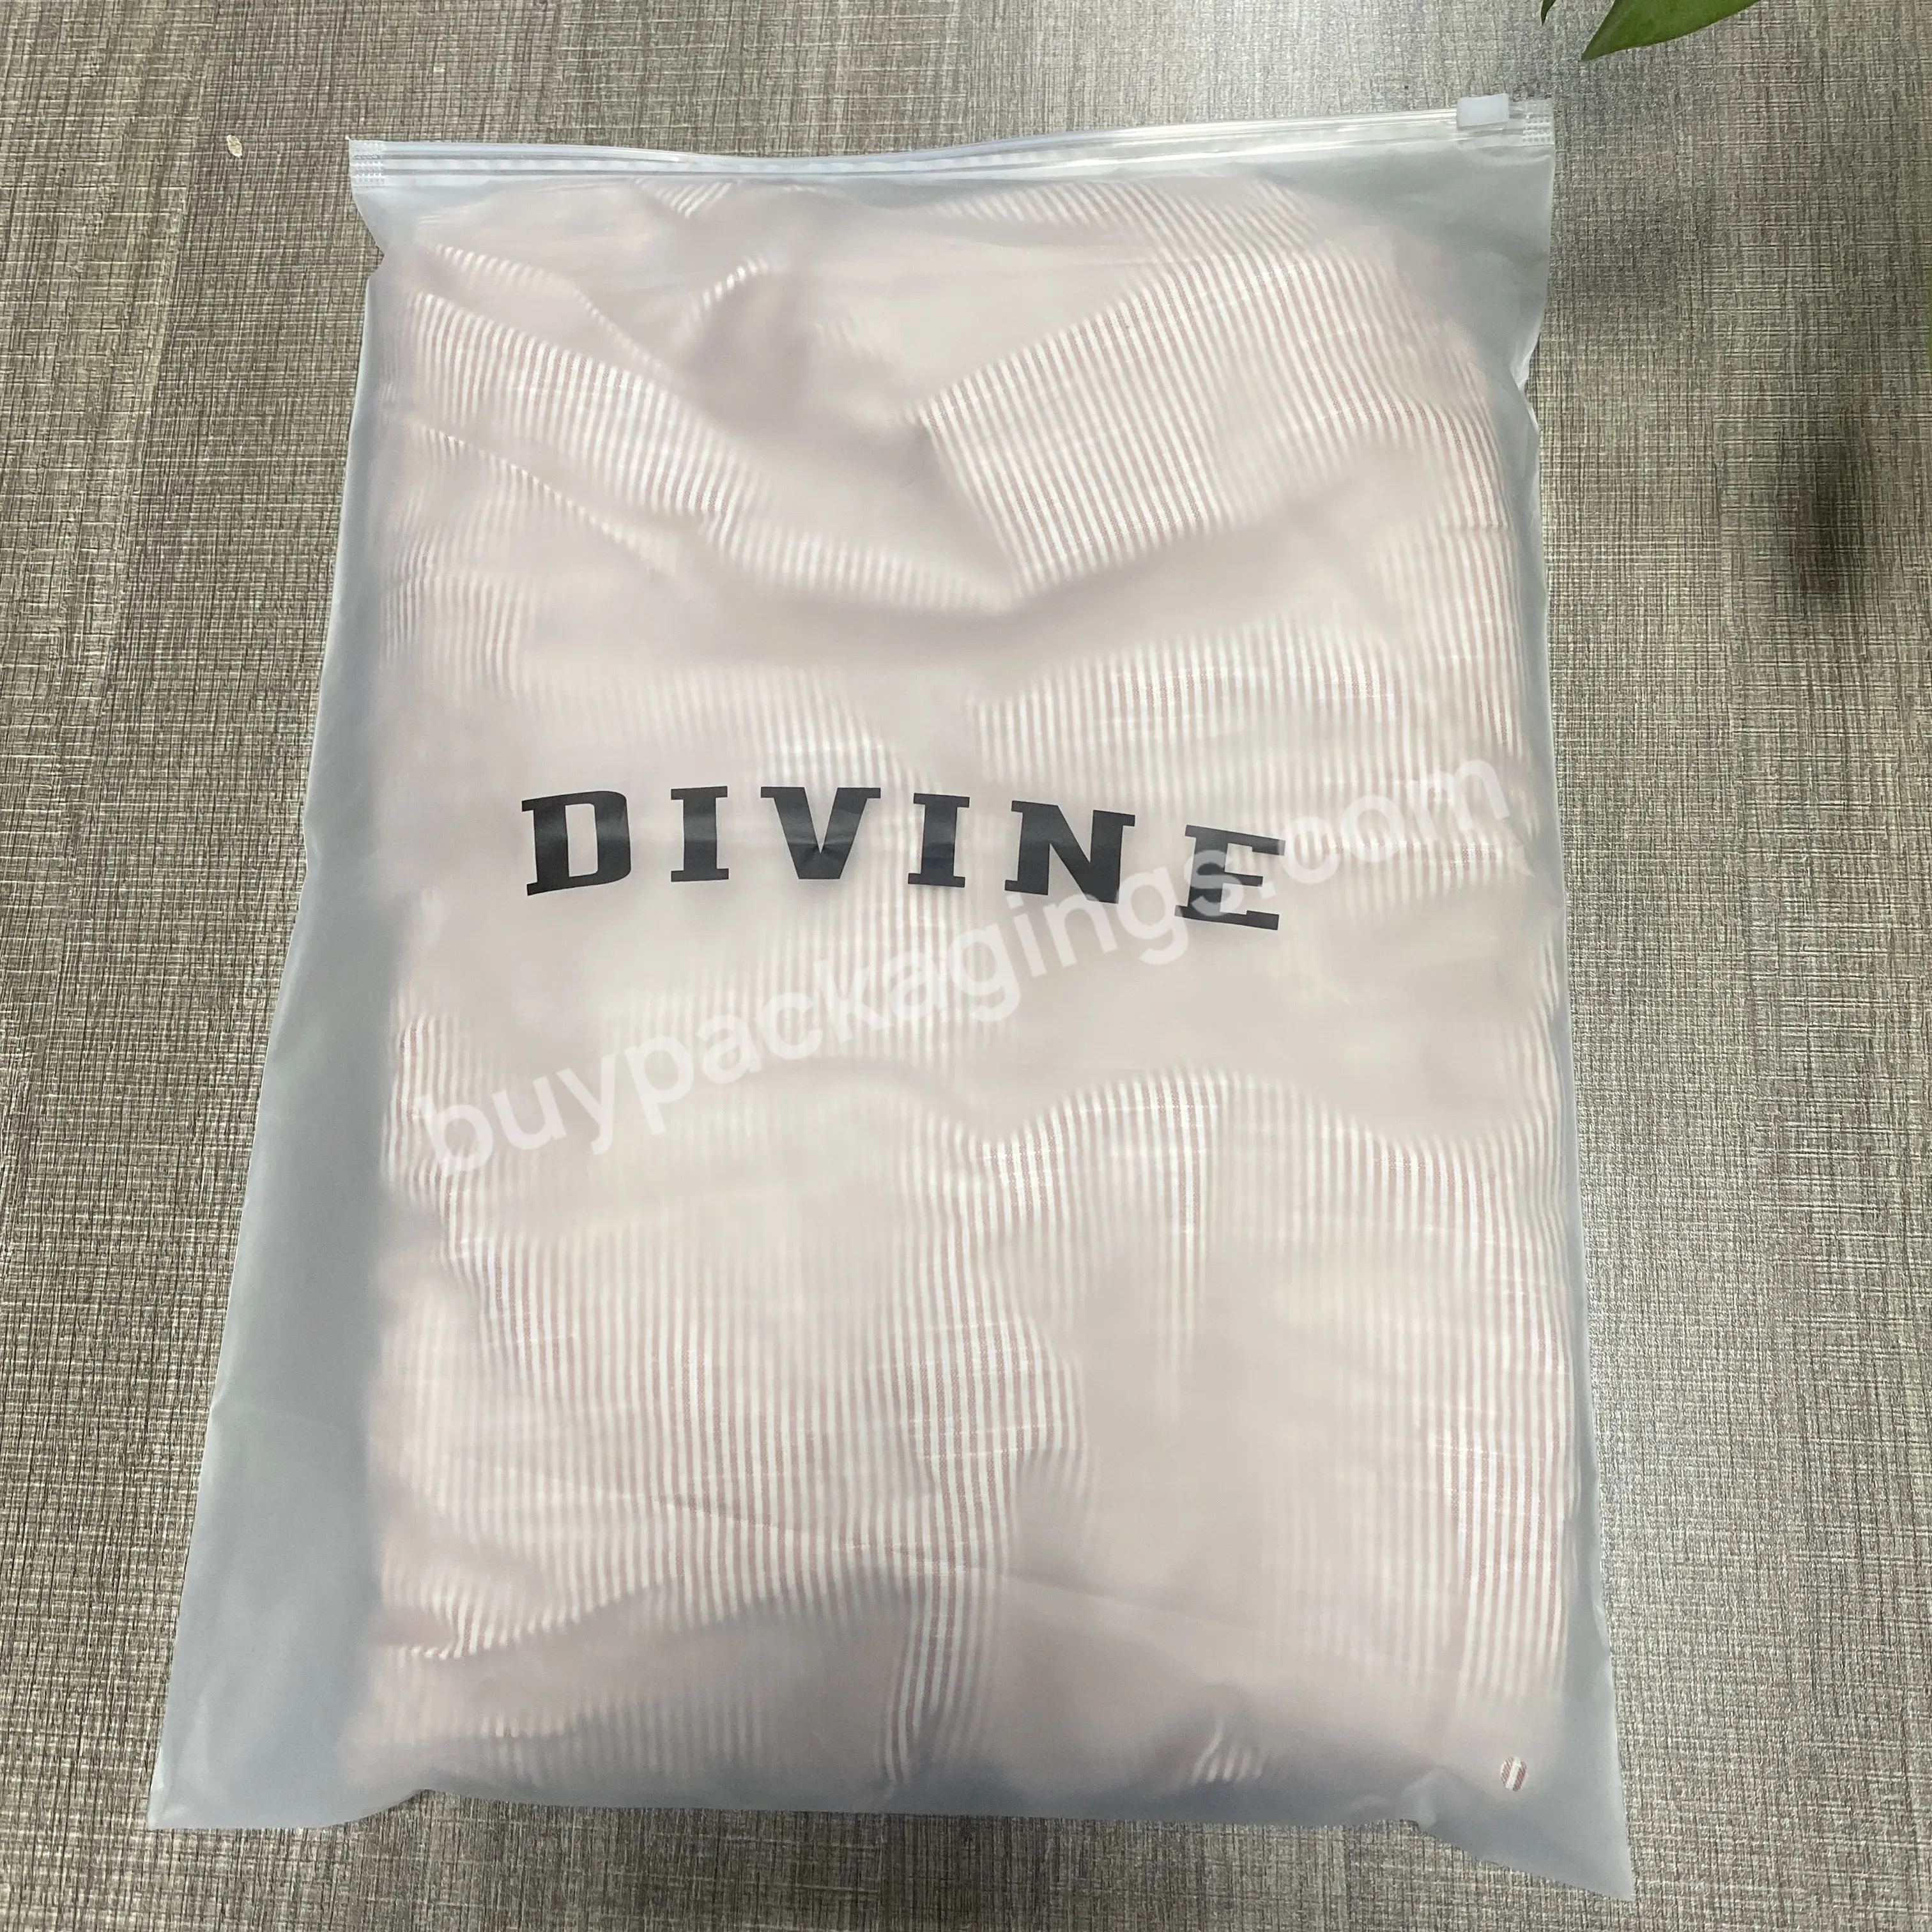 Hot Sale Customized Frosted Zipper Plastic Bags Packaging Bags For Shirts/hoodies/pants With Your Logo